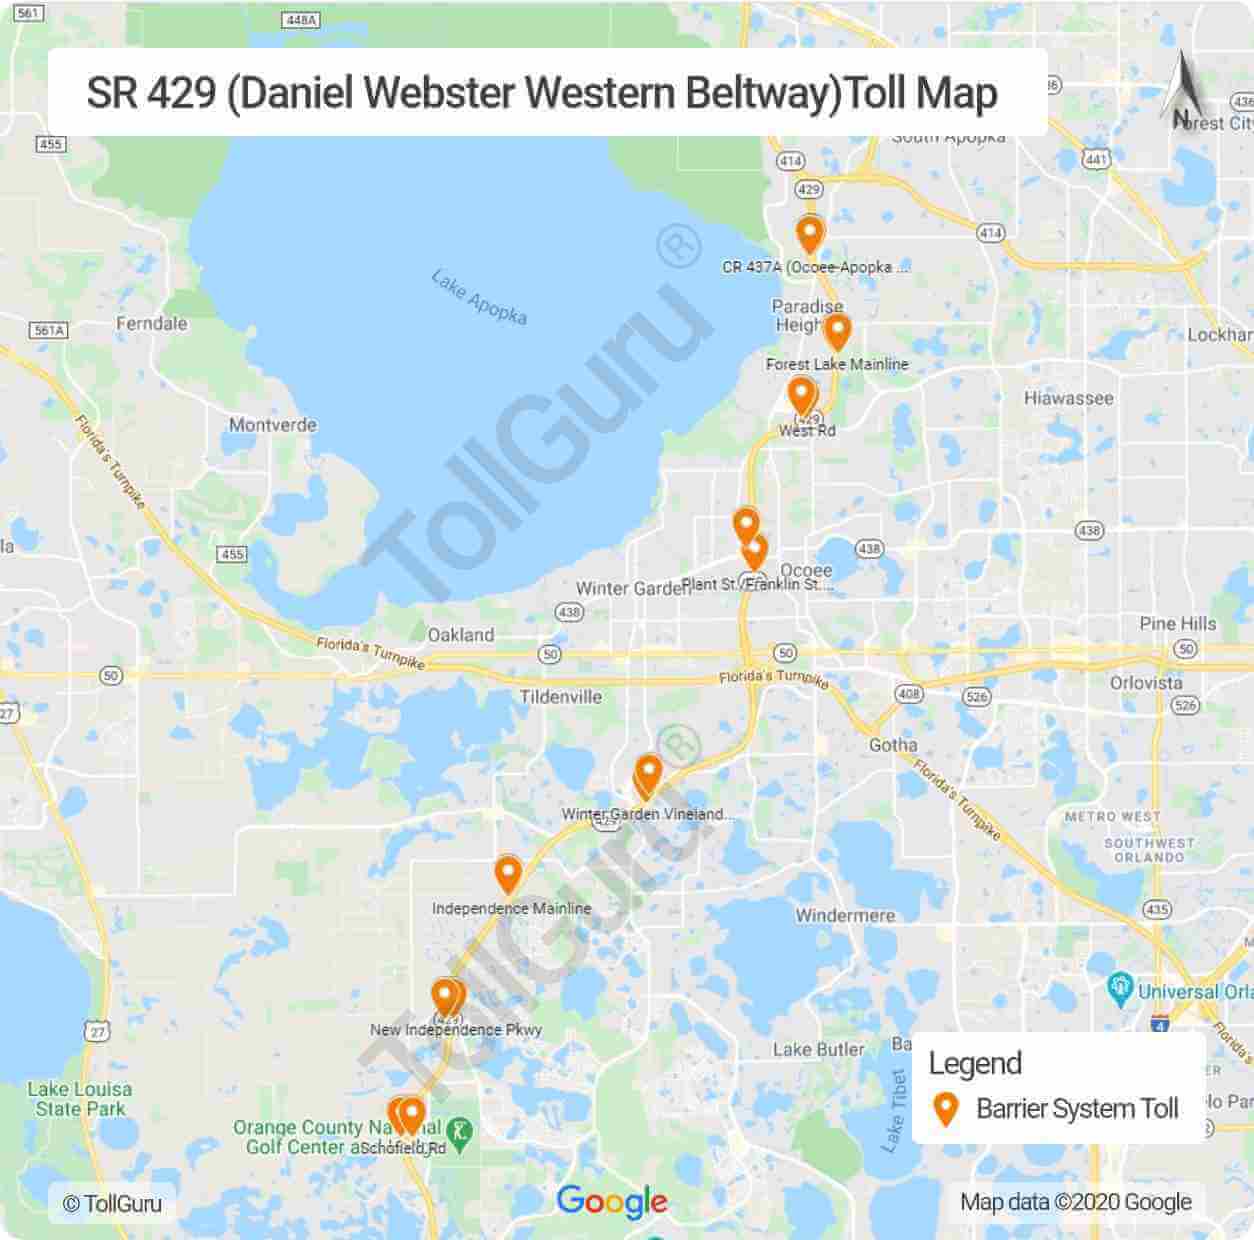 Toll booth locations on Florida 429 Expressway or Daniel Webster Western Beltway from US 441 to Interstate 4